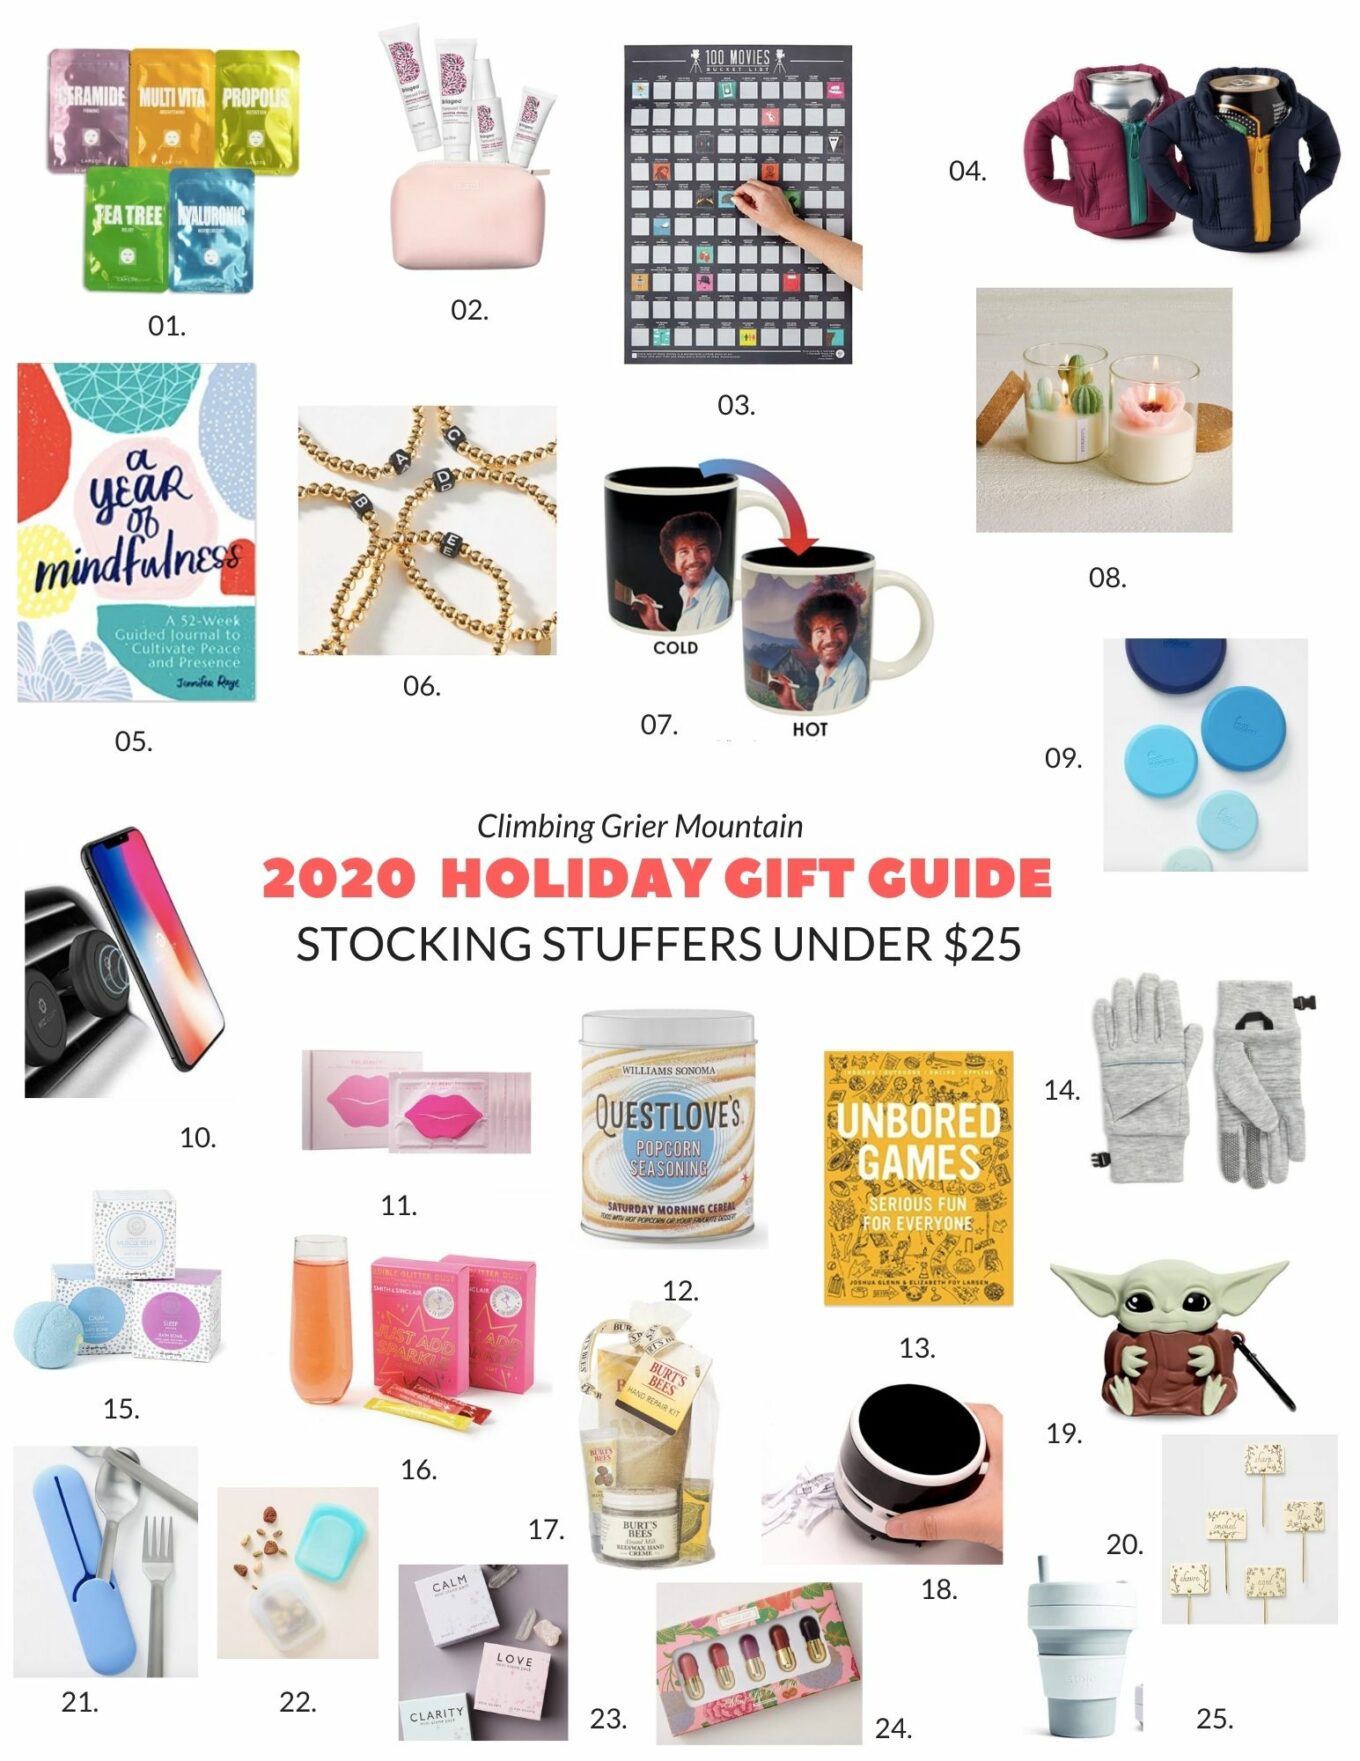 https://thecuriousplate.com/wp-content/uploads/2020/11/CGM-2020-Holiday-Gift-Guide-Gifts-Under-25-www.climbinggriermountain.com_-1.jpg